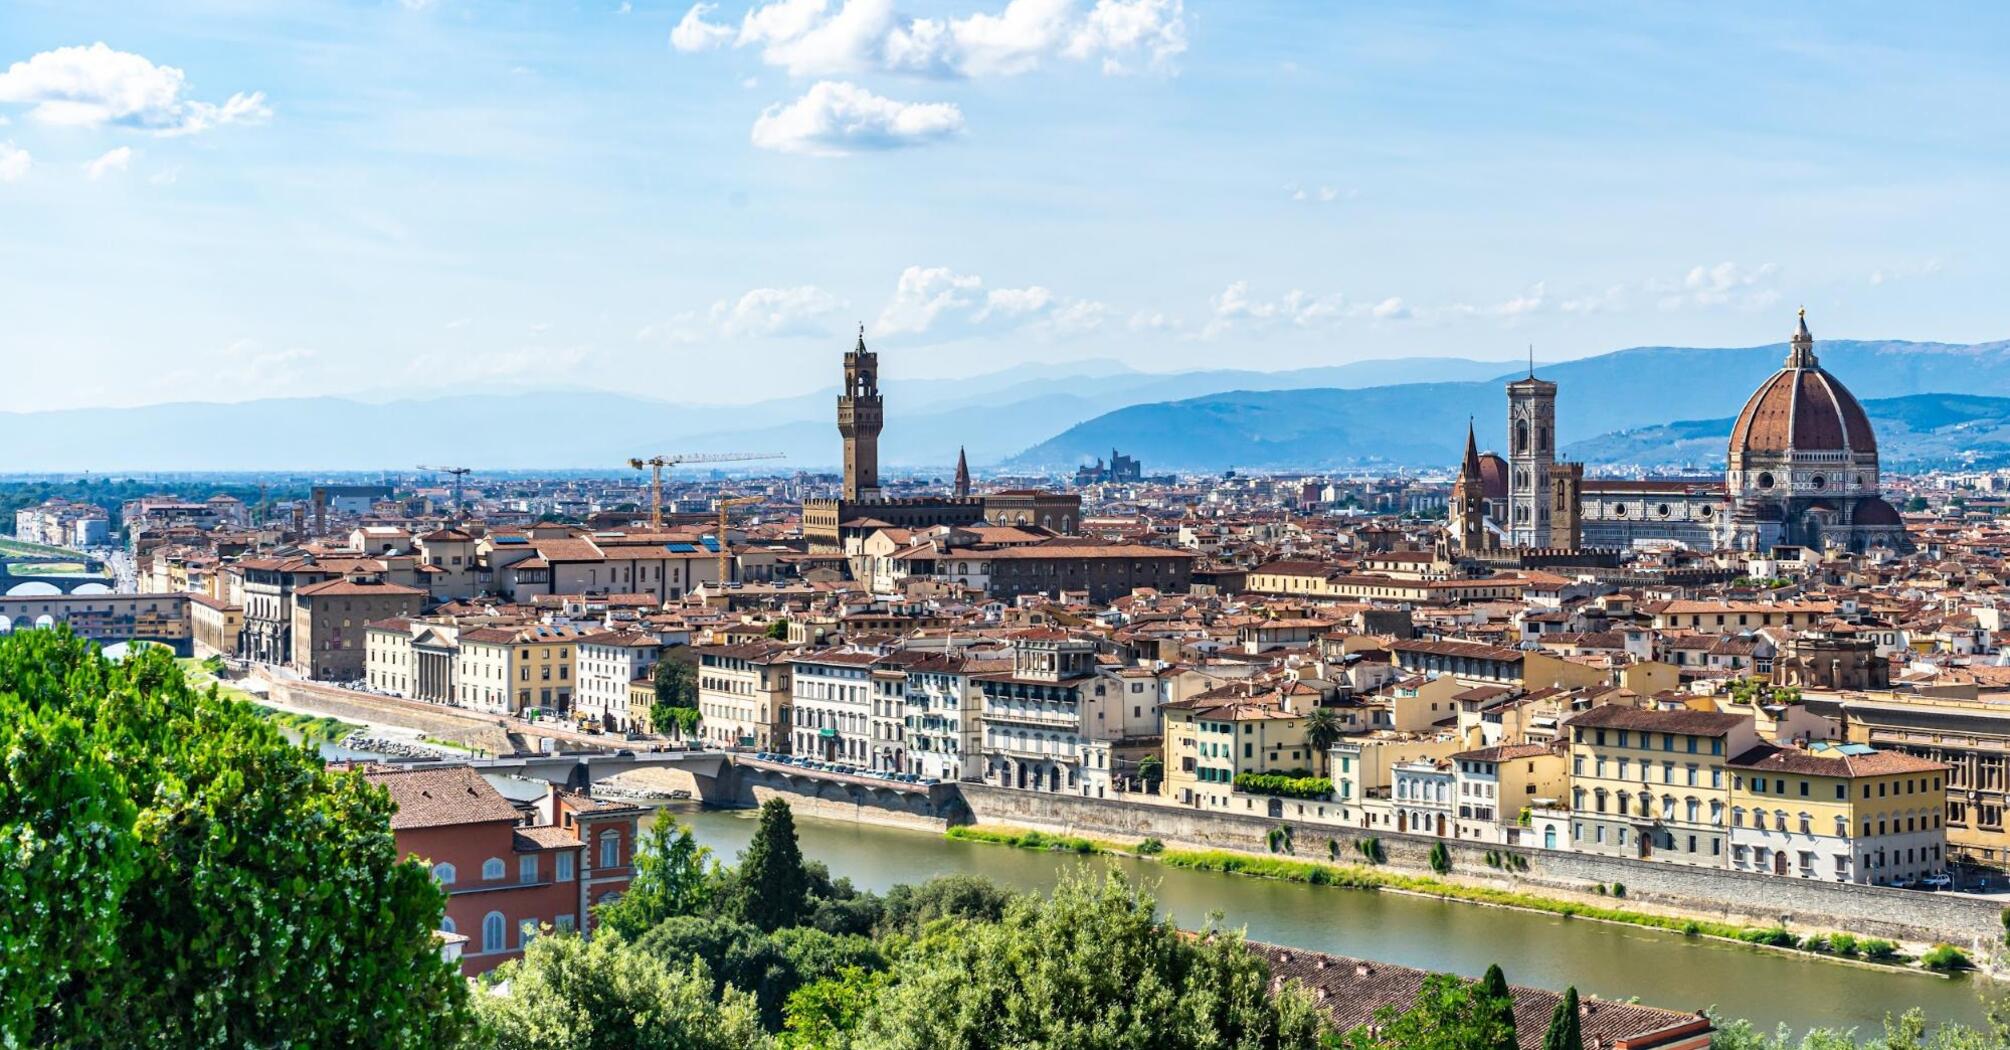 Florence in all its glory